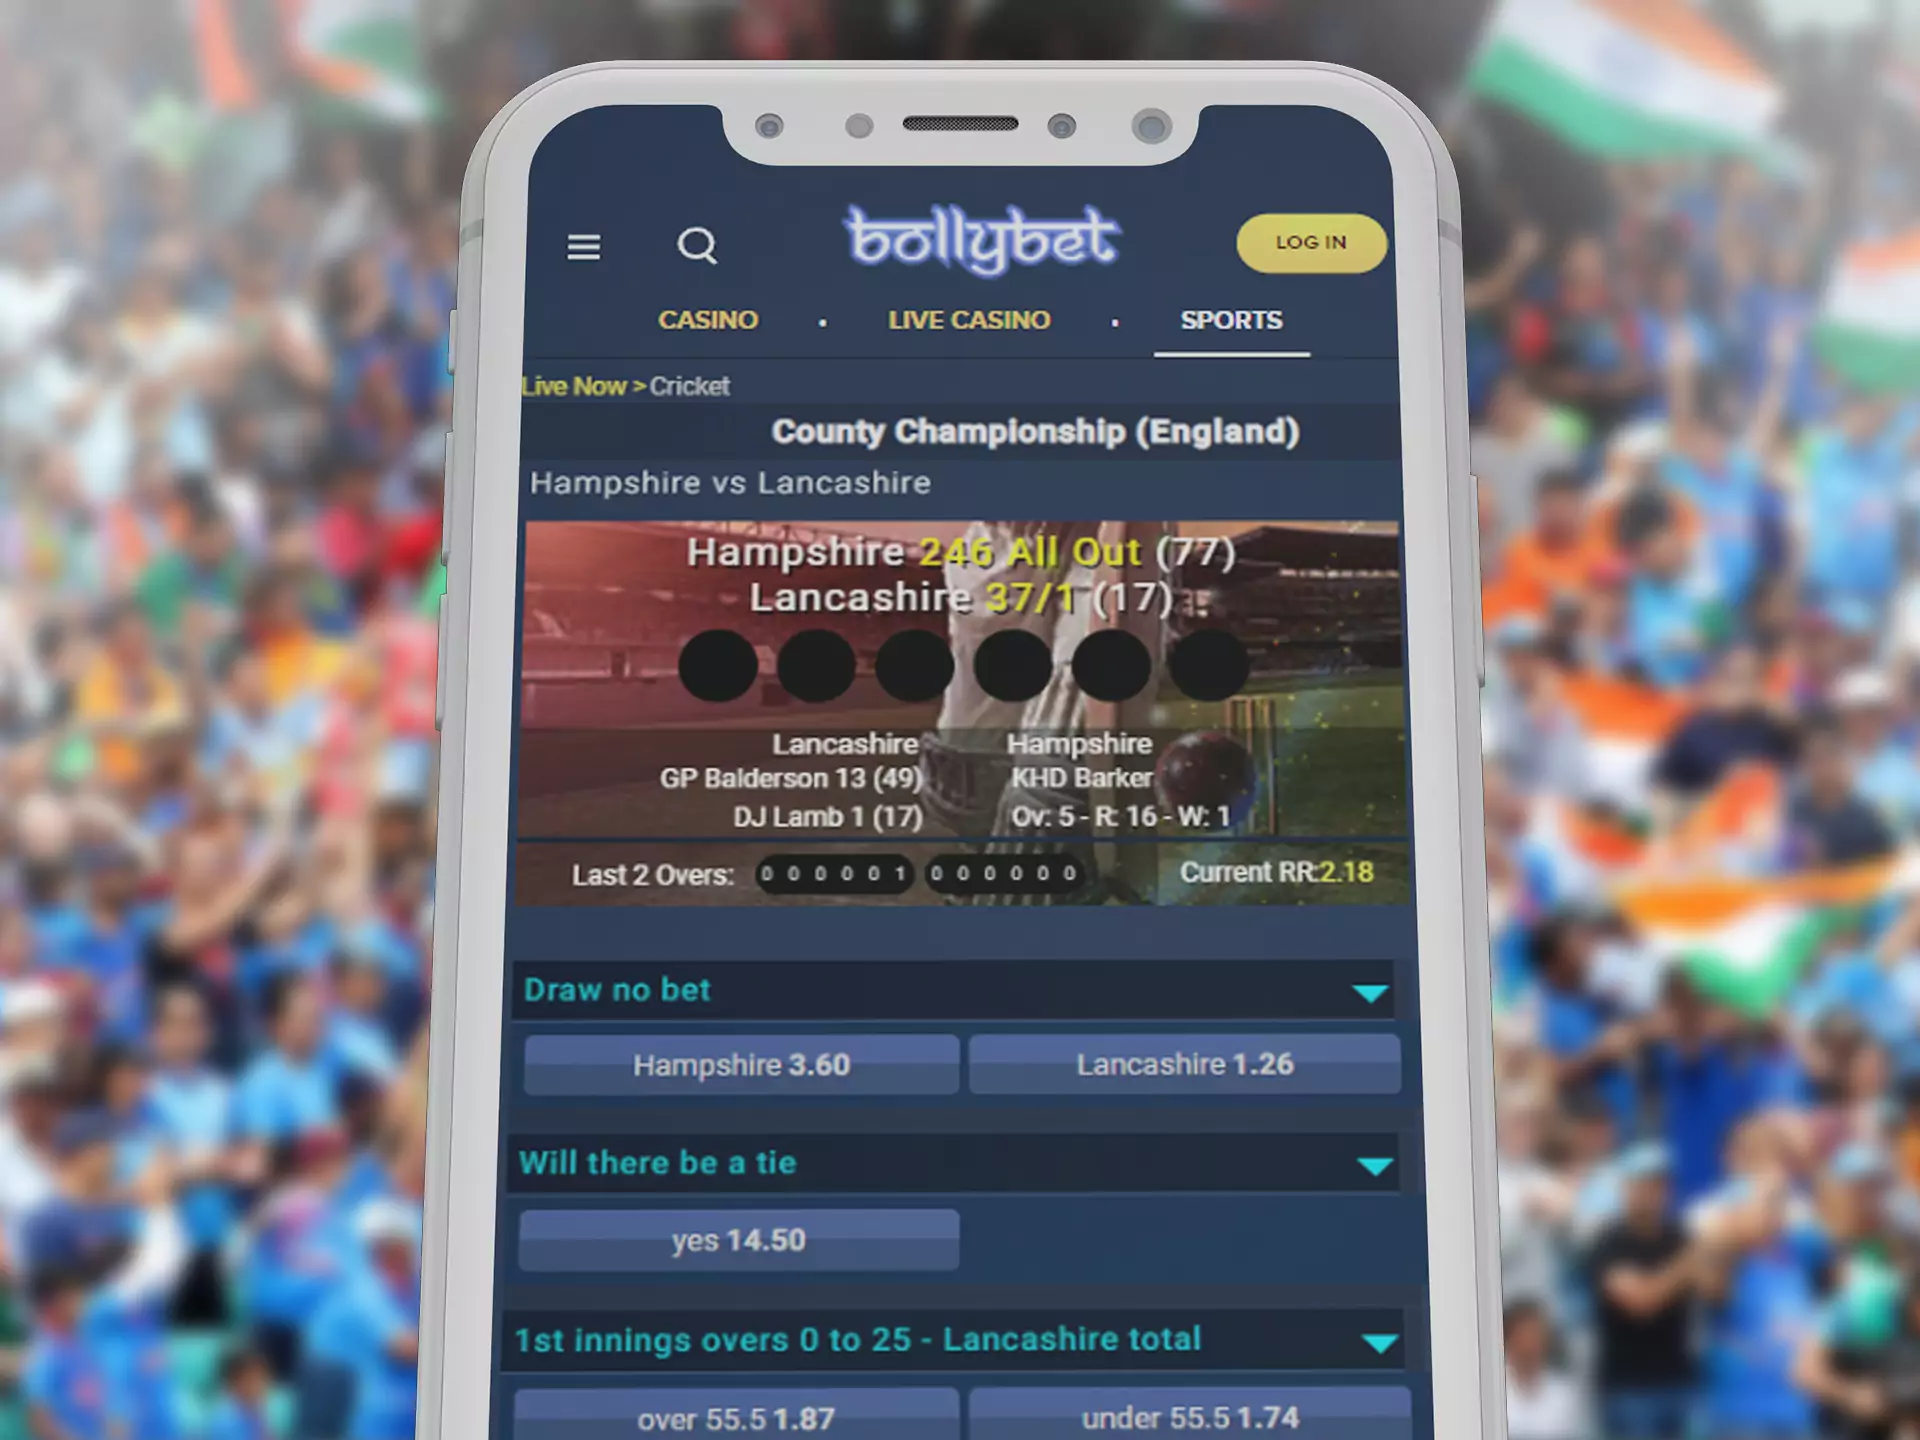 Make bets in Bollybet on the various outcomes of matches on your smartphone.